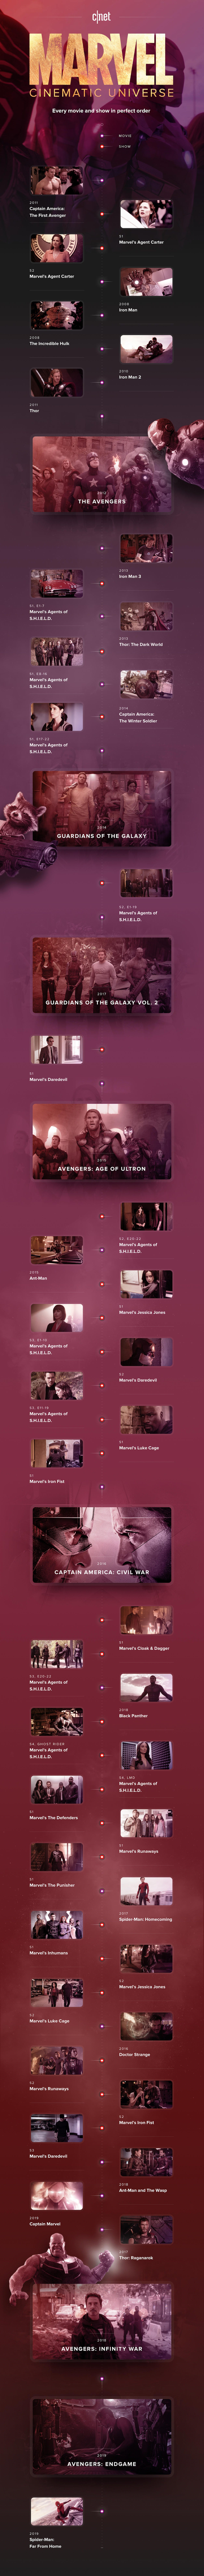 How to Watch Marvel Movies and TV Shows in Order